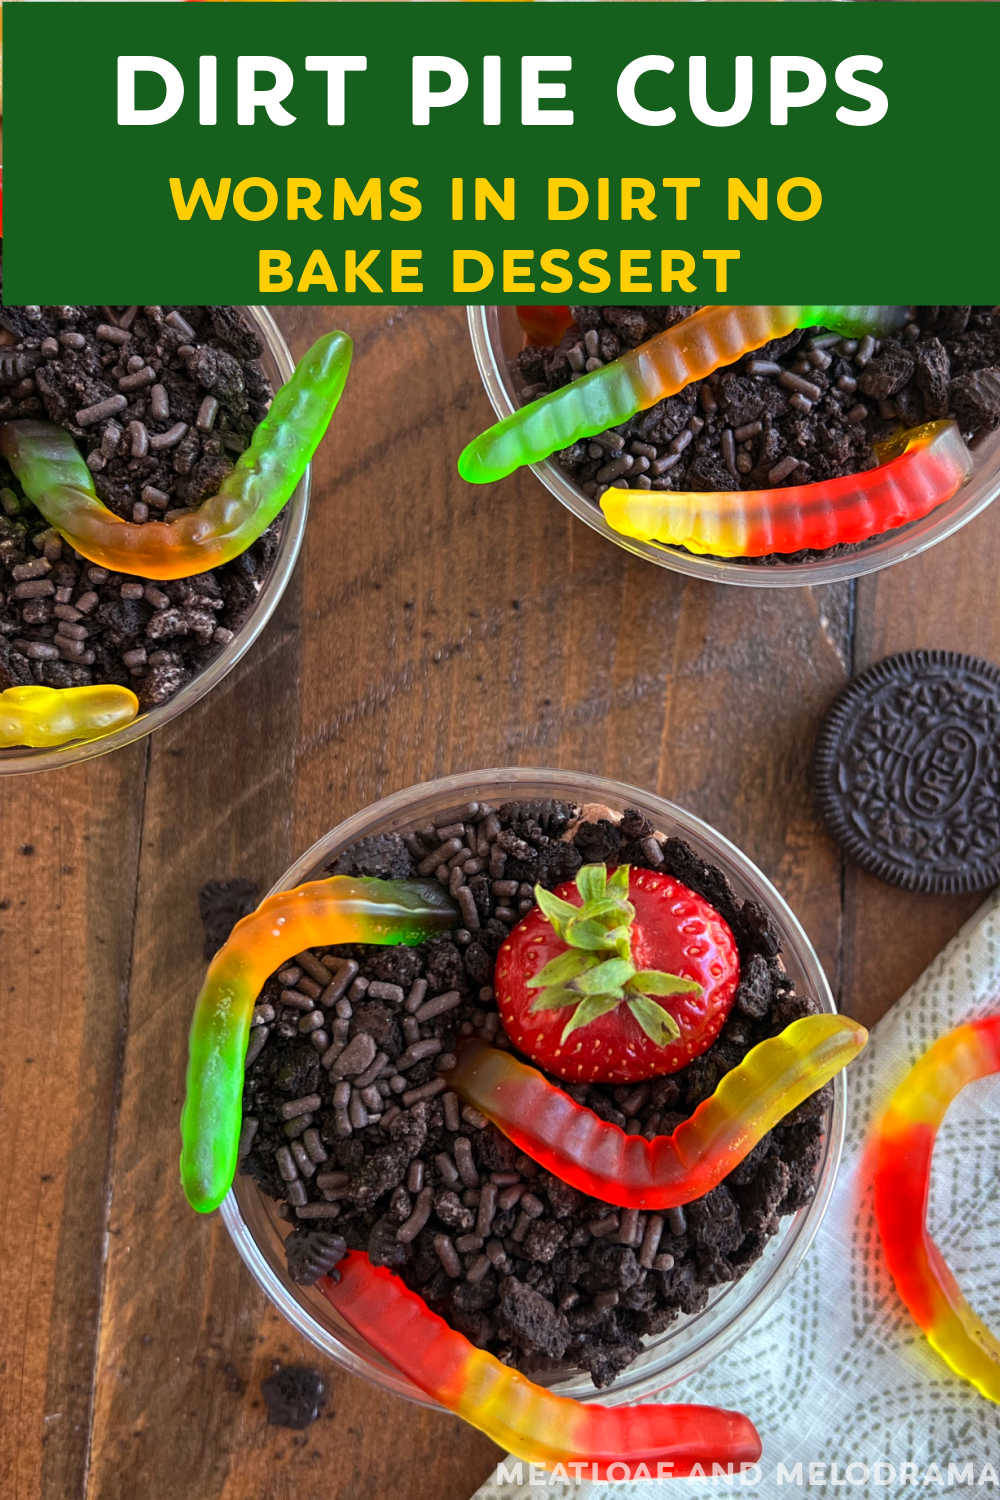 This Dirt Pie Recipe with gummy worms, Oreo cookies, chocolate pudding and Cool Whip is an easy no bake dessert perfect for summer. Kids love this mud pie recipe, also called worms in dirt or dirt pudding! via @meamel